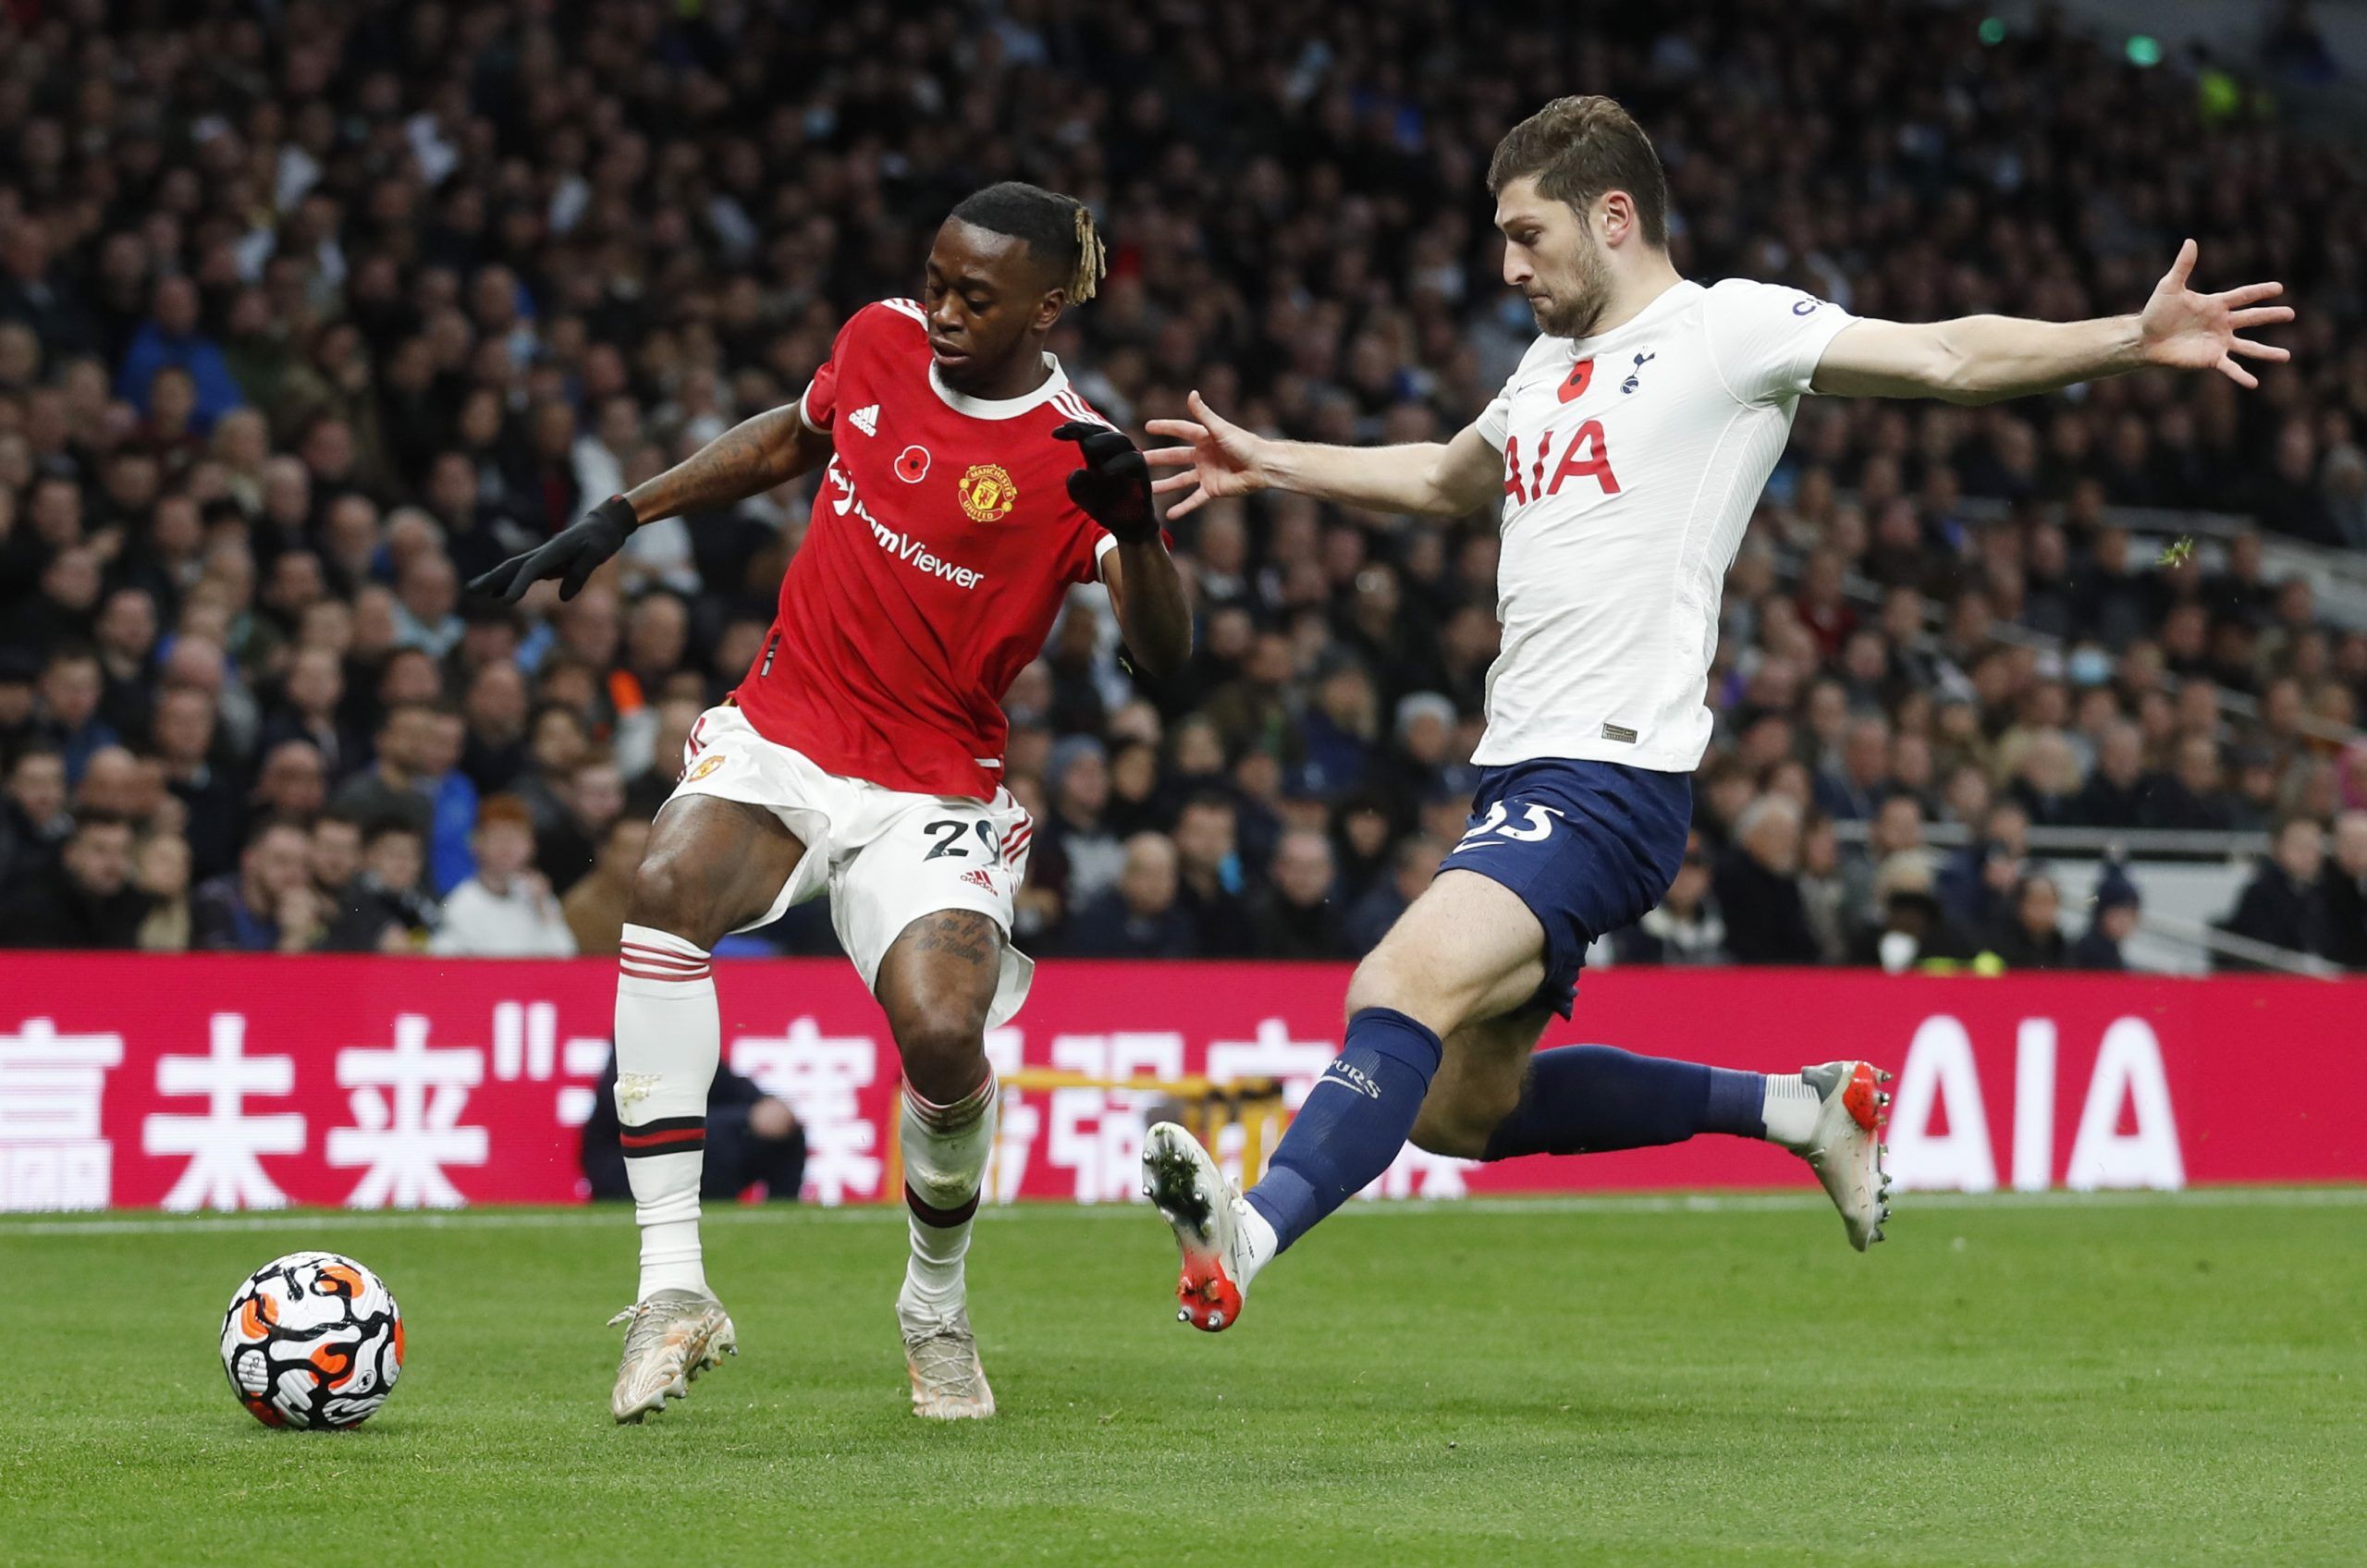 Soccer Football - Premier League - Tottenham Hotspur v Manchester United - Tottenham Hotspur Stadium, London, Britain - October 30, 2021 Tottenham Hotspur's Ben Davies in action with Manchester United's Aaron Wan-Bissaka Action Images via Reuters/Matthew Childs EDITORIAL USE ONLY. No use with unauthorized audio, video, data, fixture lists, club/league logos or 'live' services. Online in-match use limited to 75 images, no video emulation. No use in betting, games or single club /league/player pub